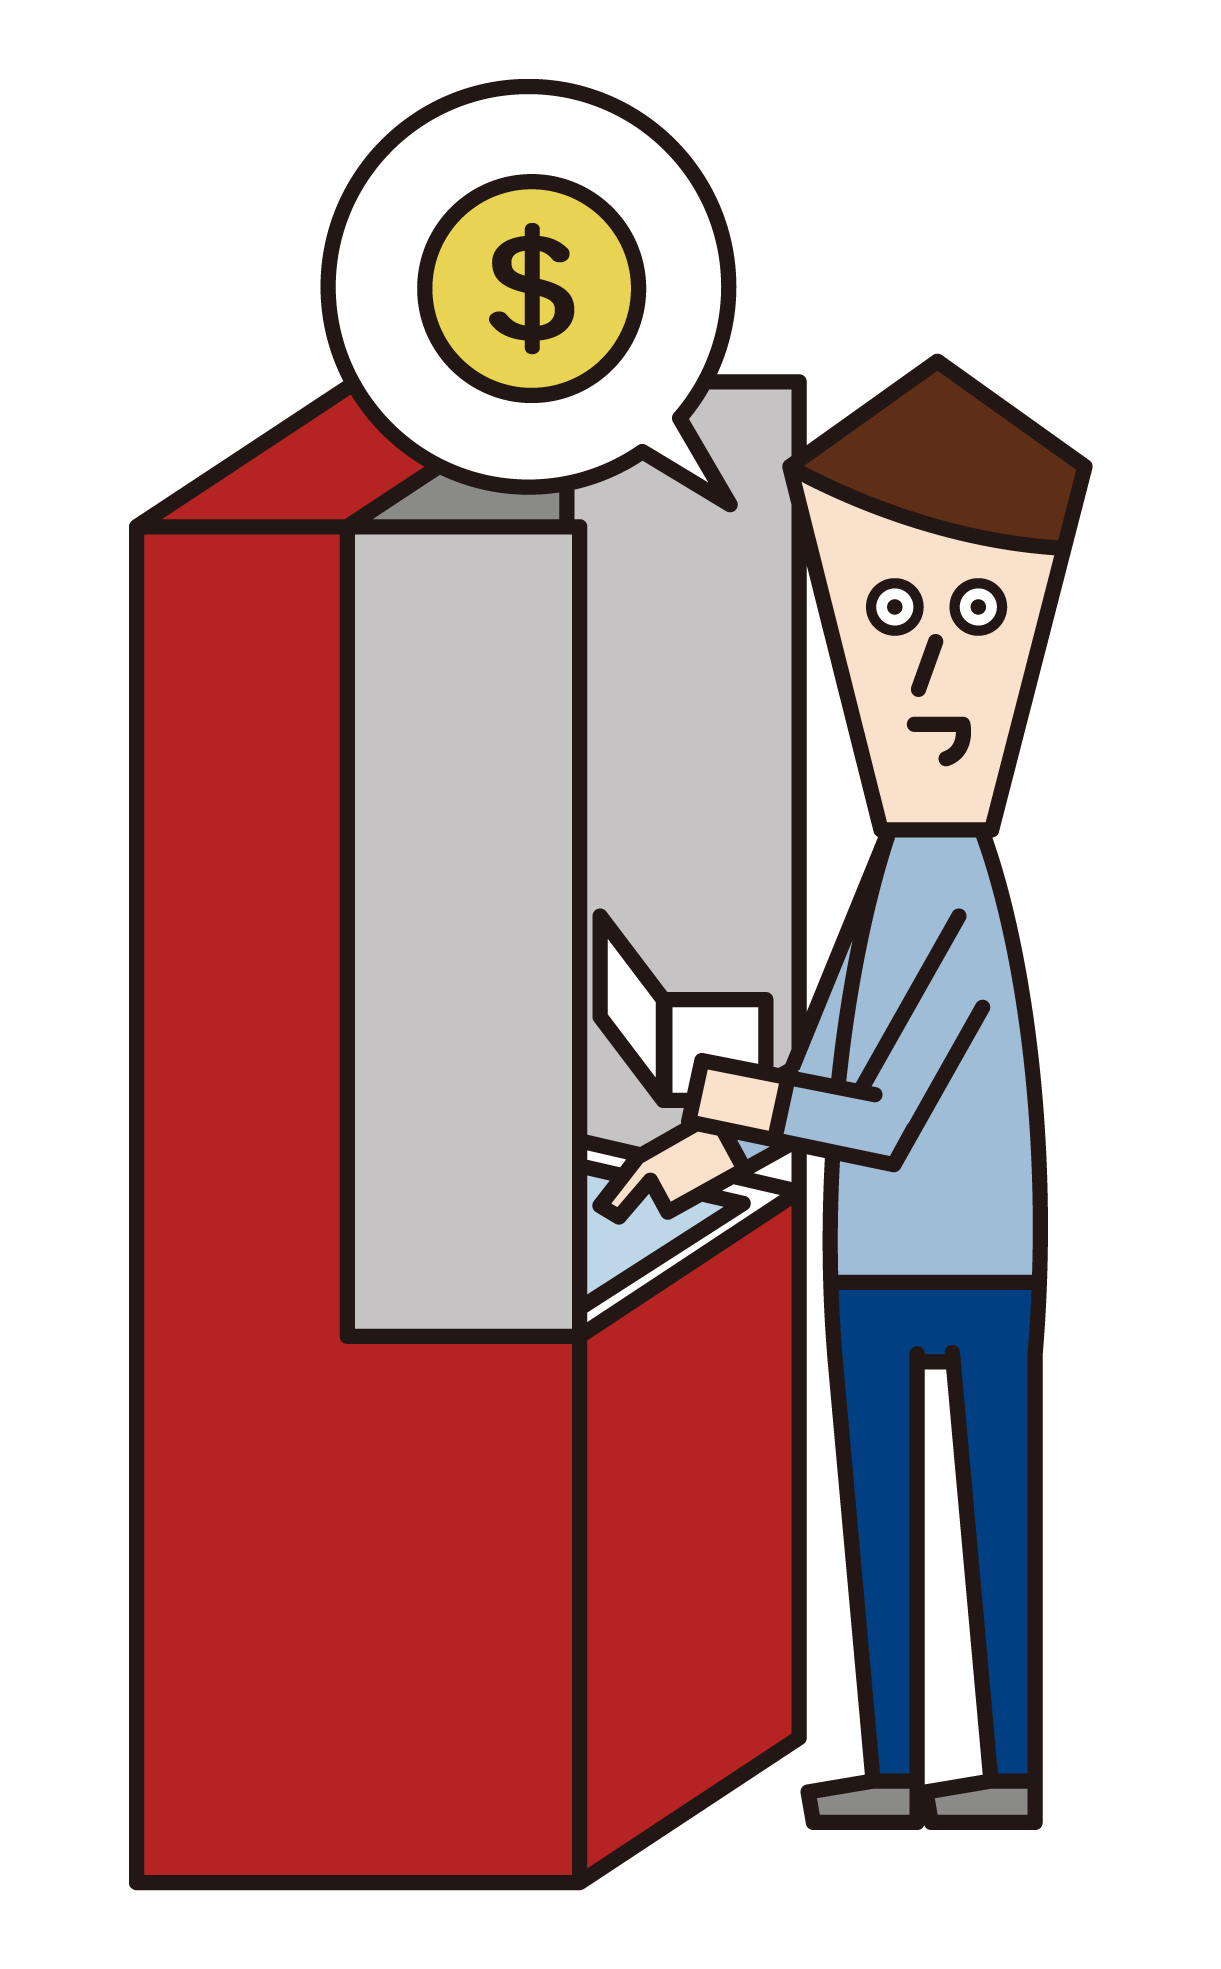 Illustration of a man using an ATM